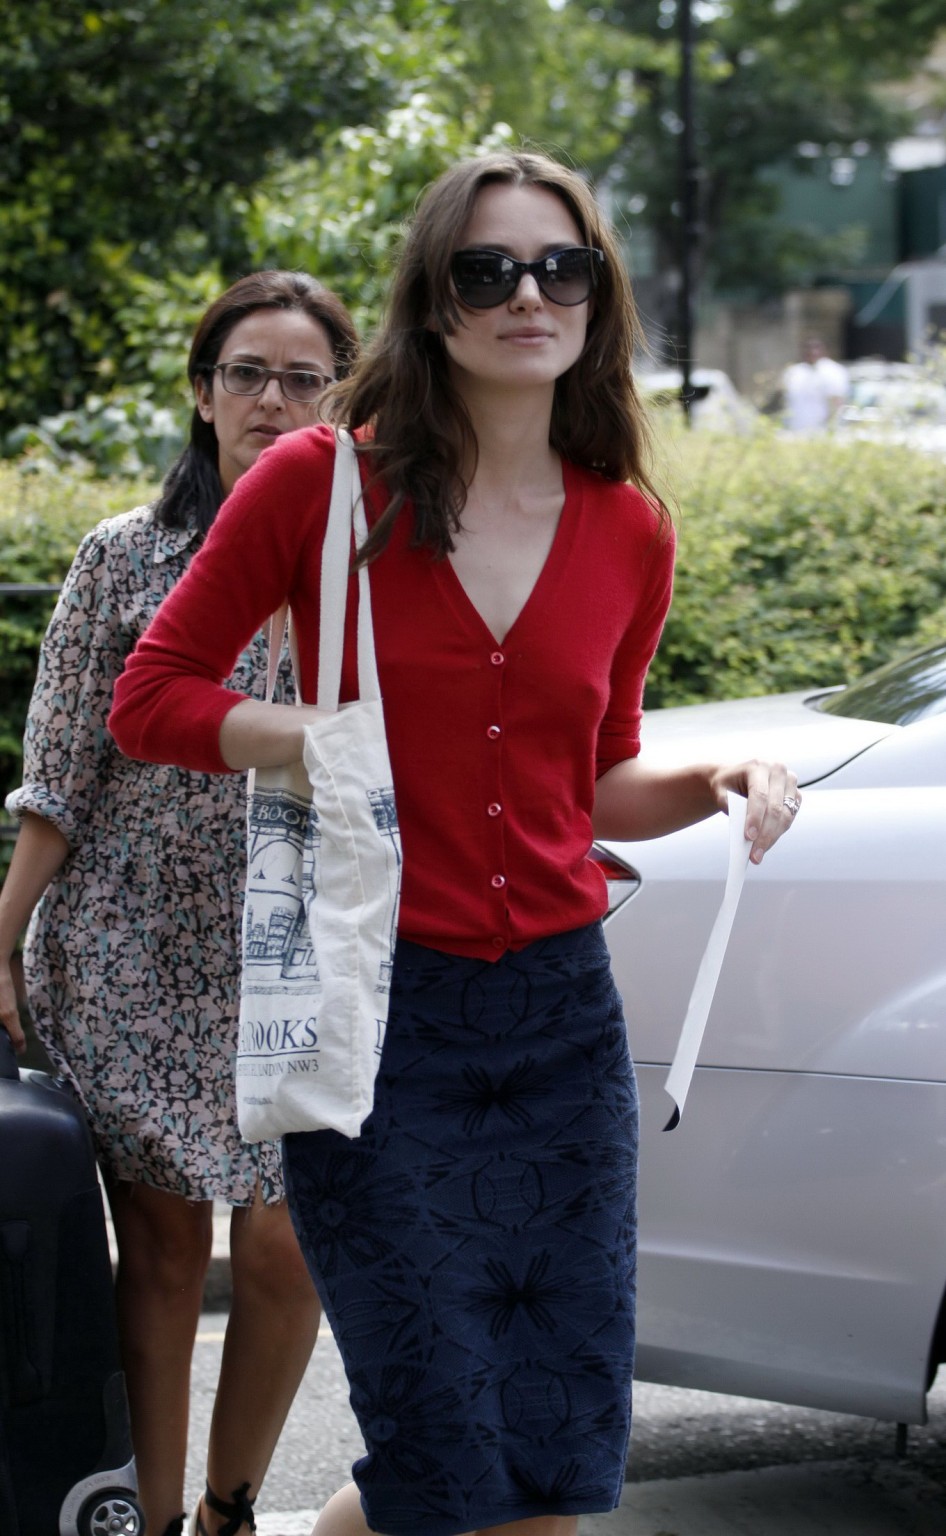 Keira knightley showing hard pokies braless in red top and skirt out in london
 #75194178